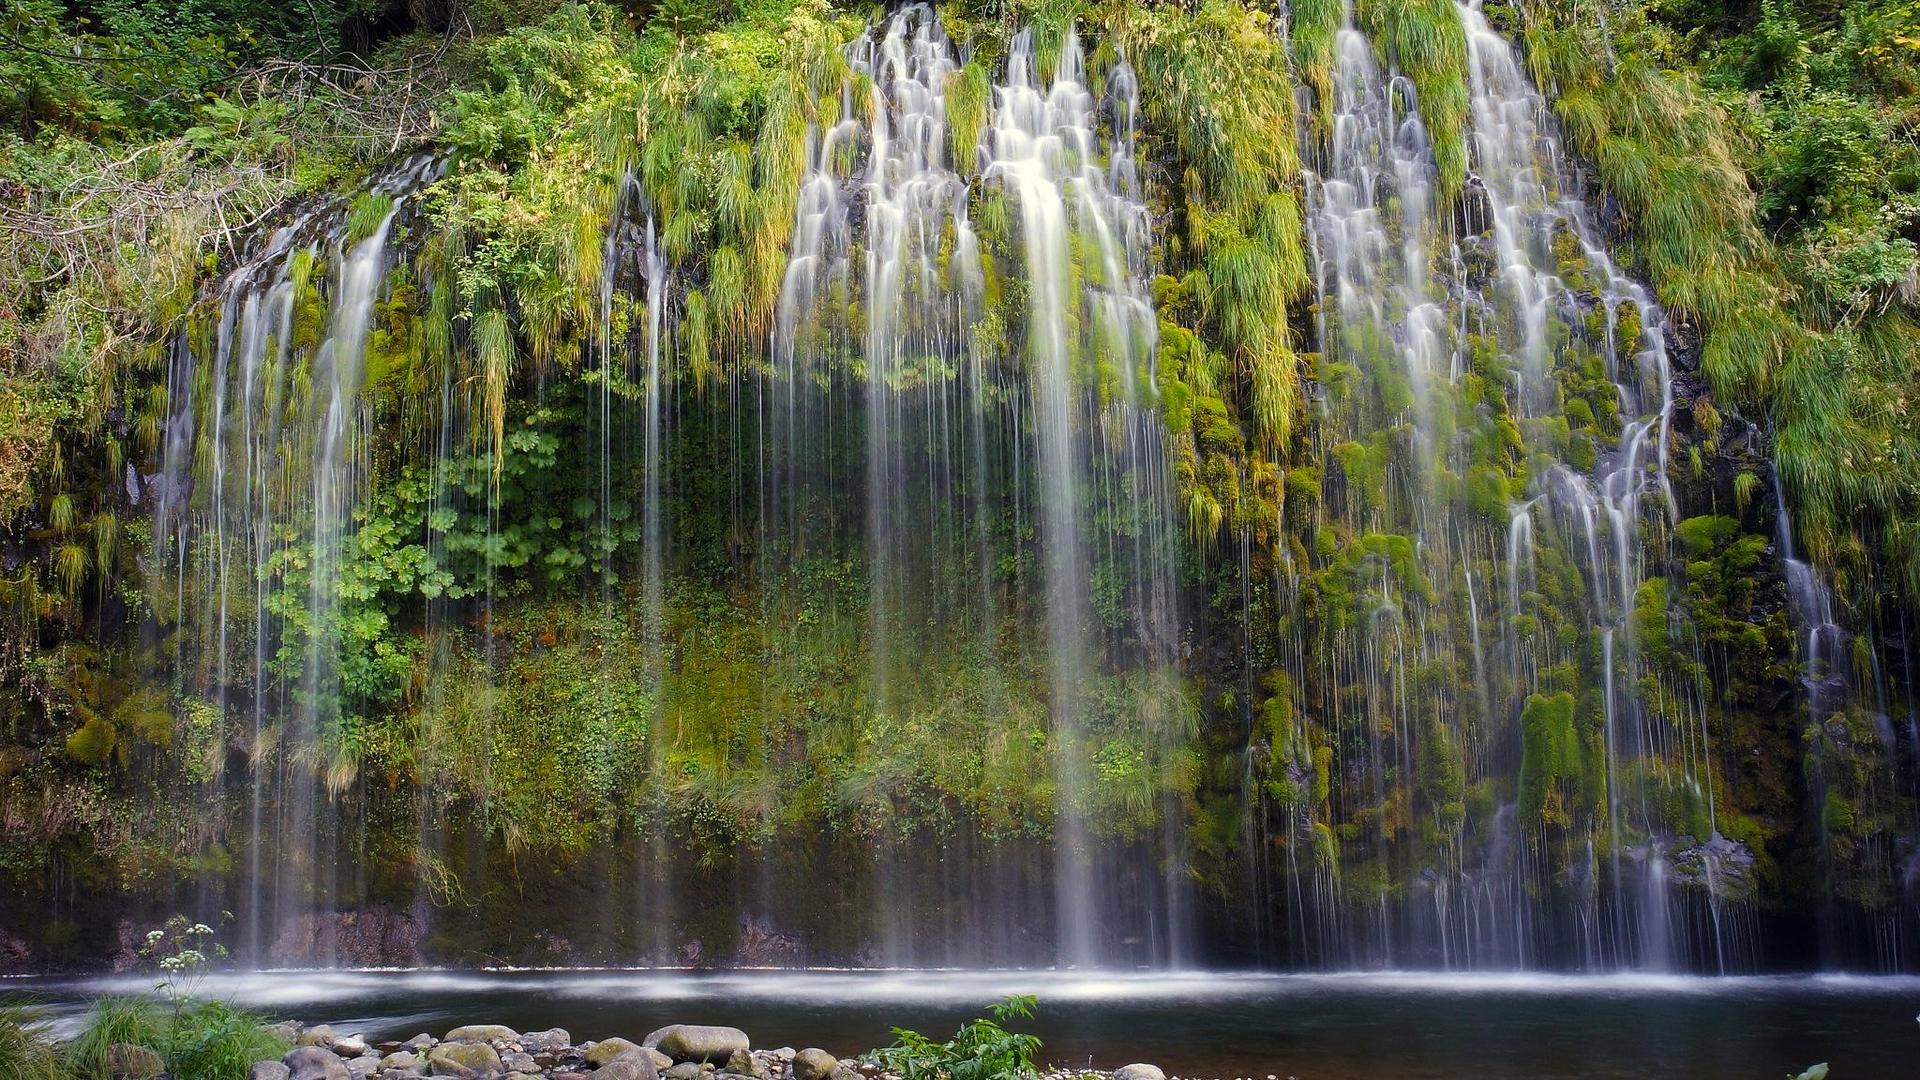 Mossbrae Falls in the Shasta Cascade area in Dunsmuir, California. In many spiritual traditions, like the Lakota in the US, water represents “the living relationship between you and I and all things."